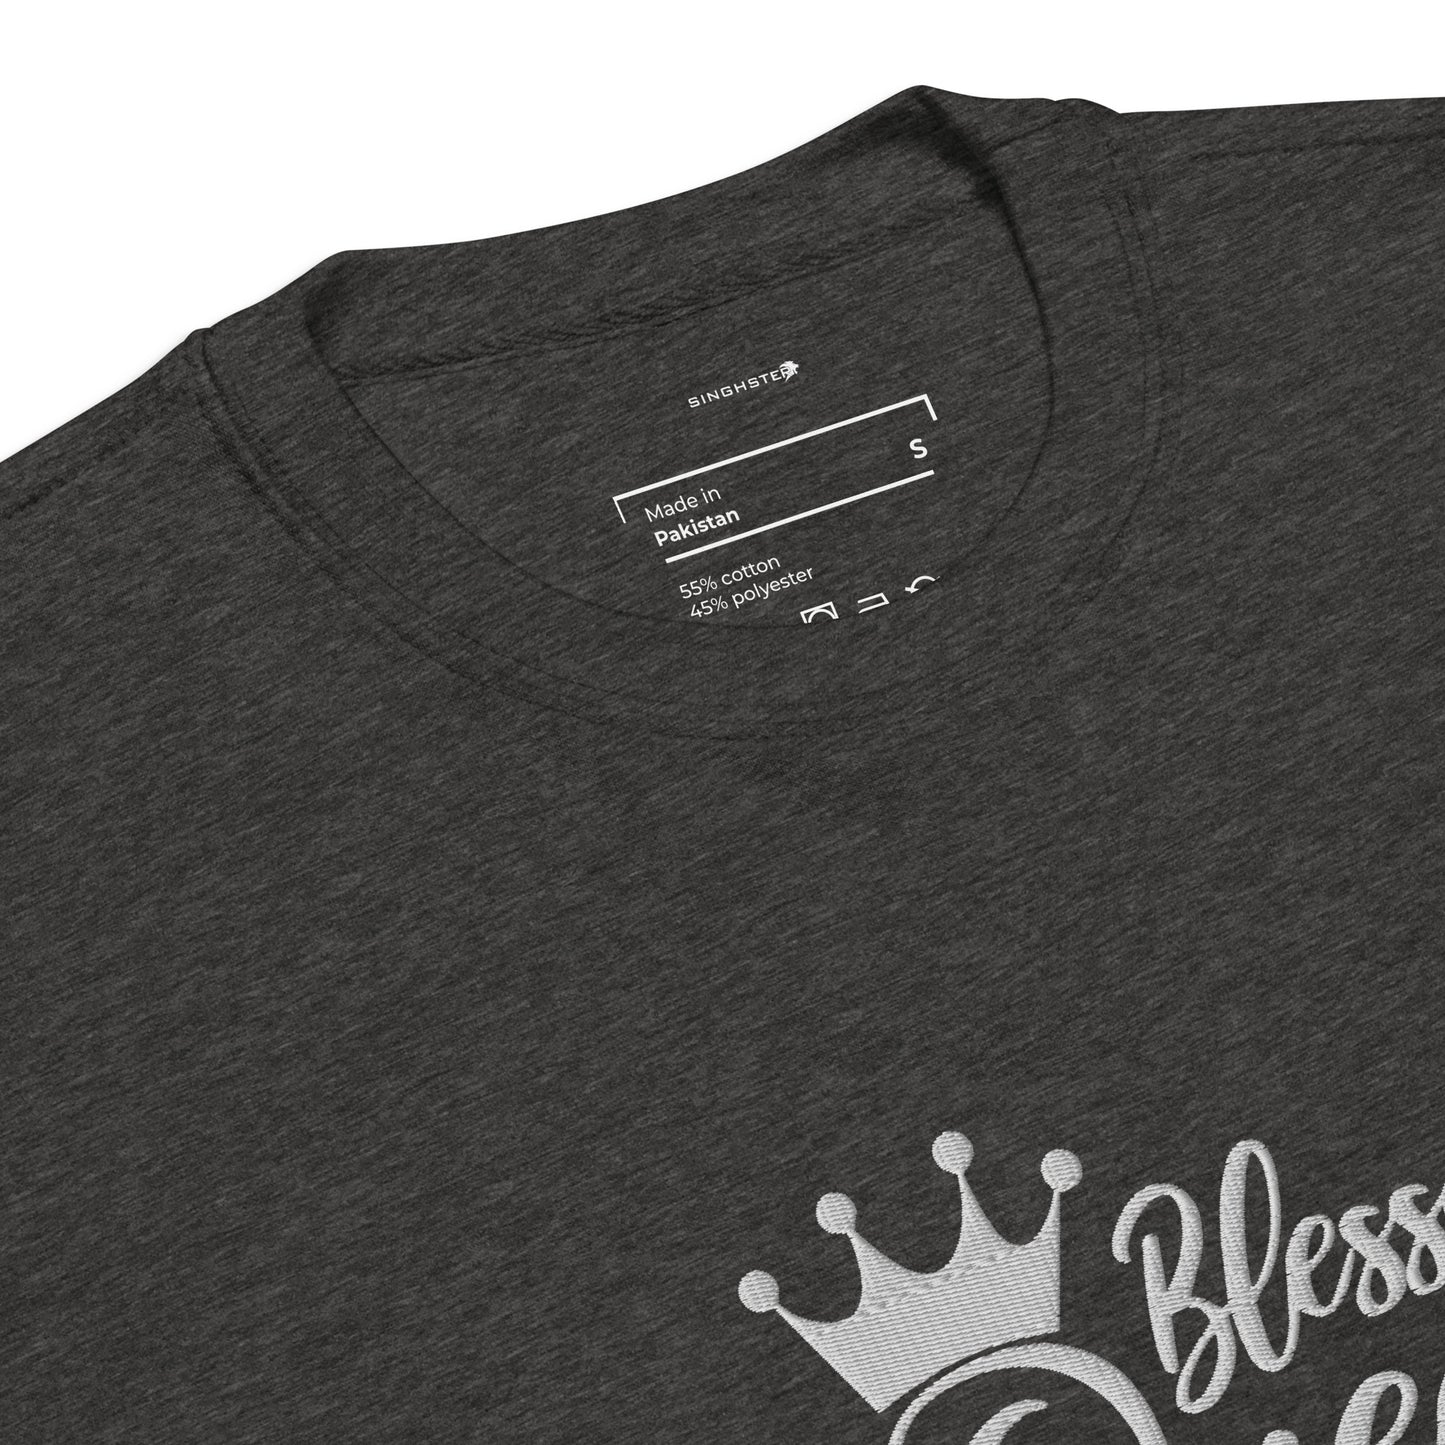 Blessed Queen Embroidered Sweatshirt